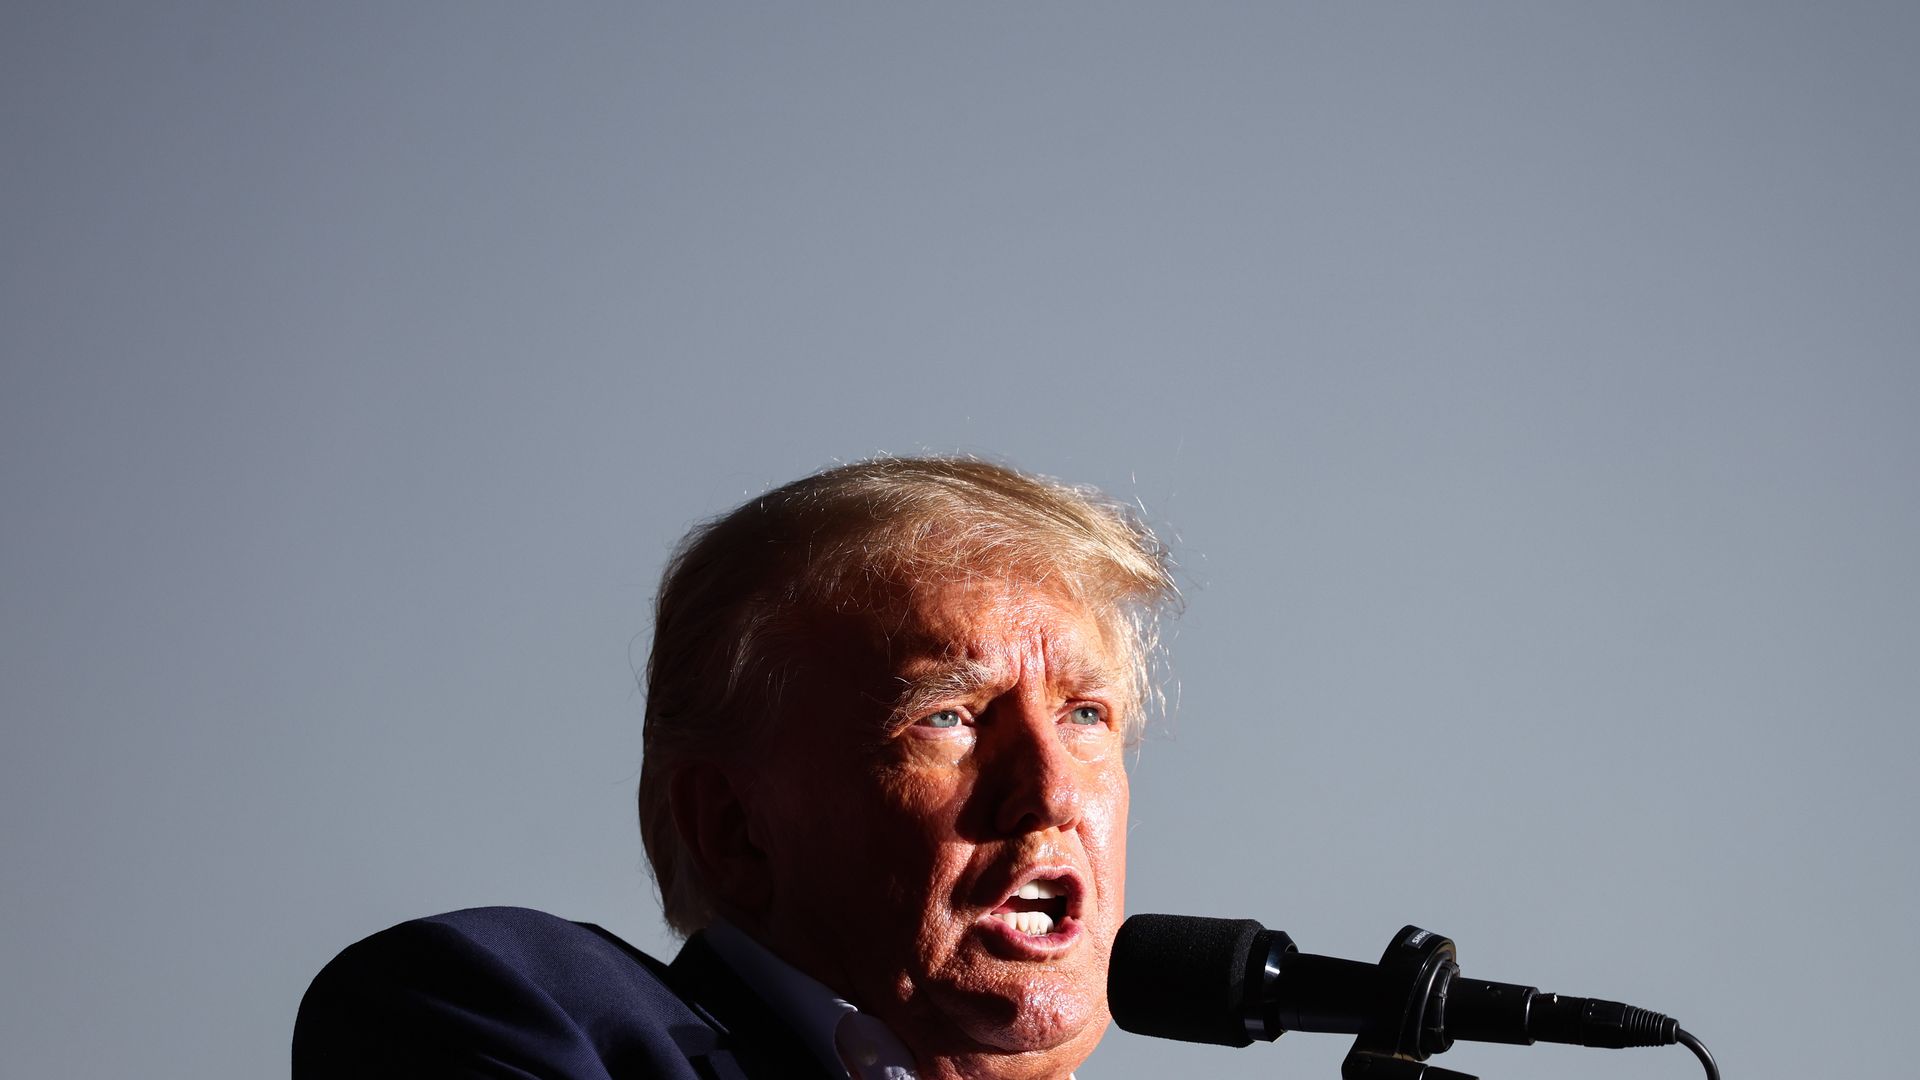 Former U.S. President Donald Trump speaks at a campaign rally at Legacy Sports USA on October 09, 2022 in Mesa, Arizona